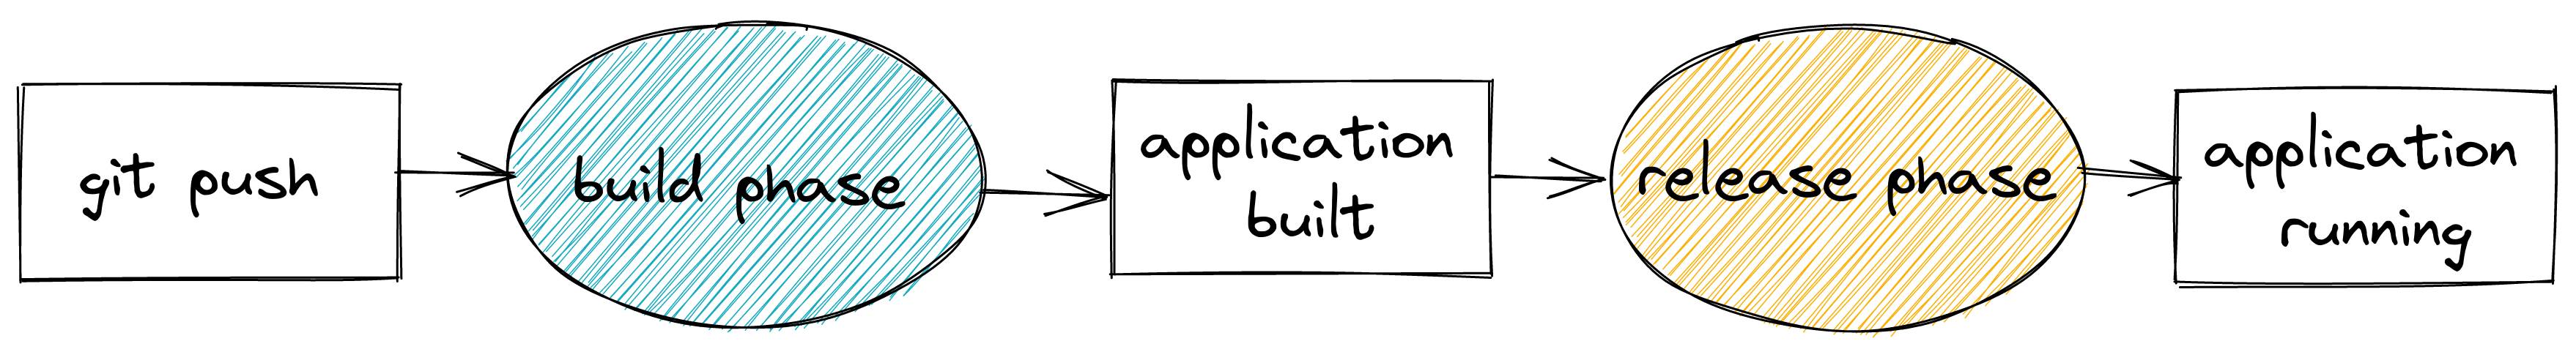 Application phases